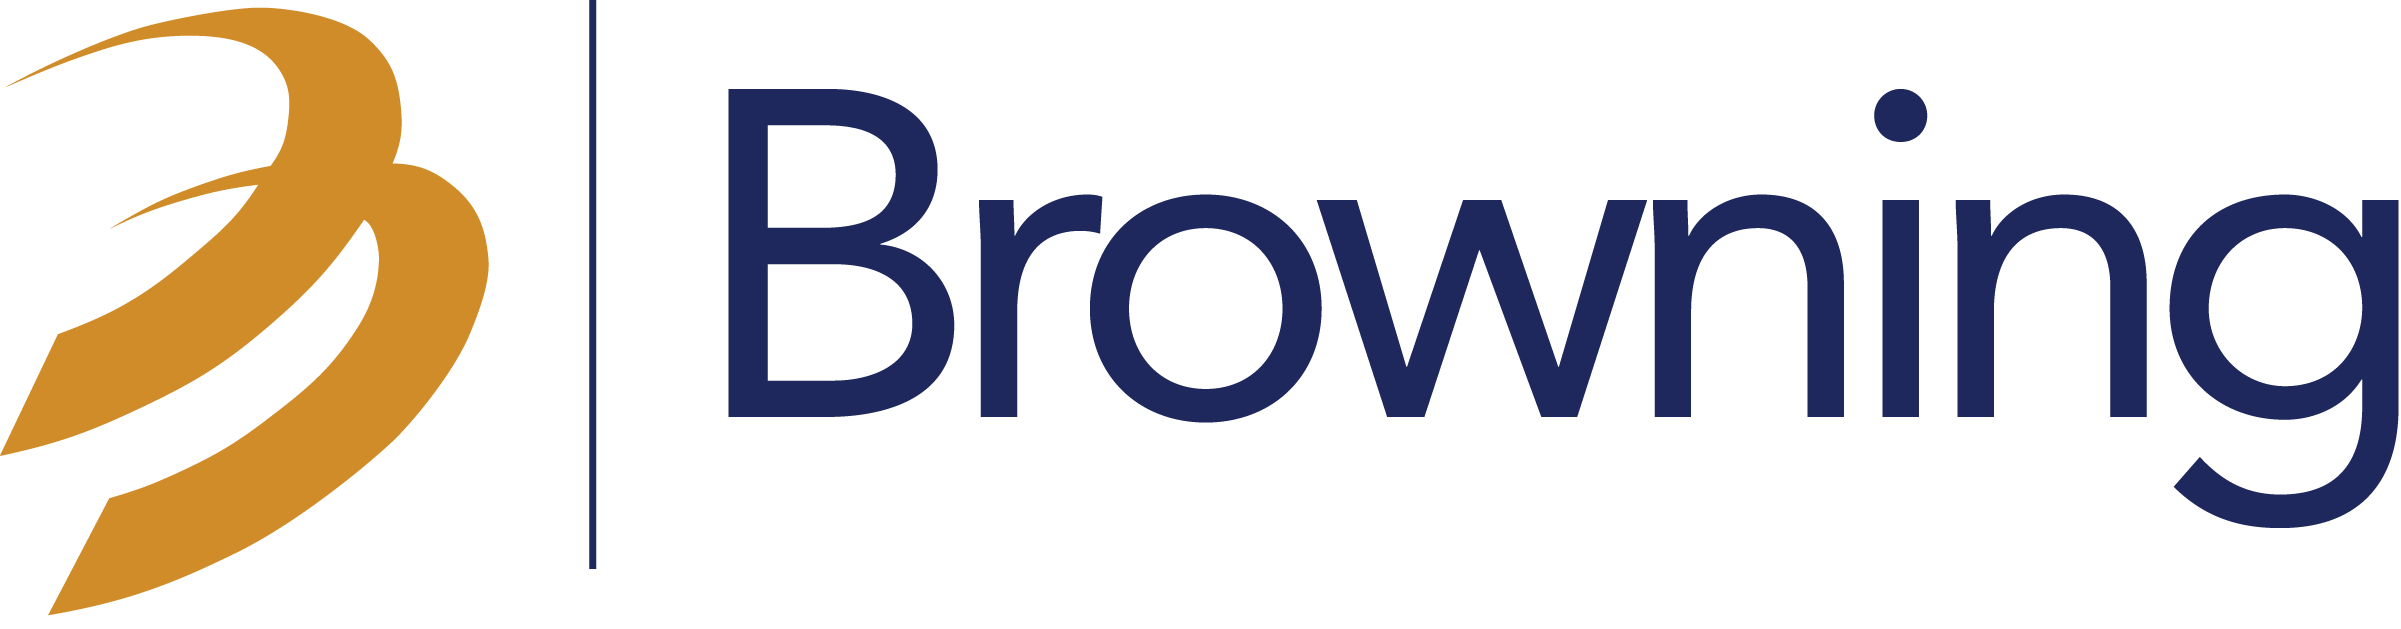 Browning logo with a golden feather and navy text on a transparent background